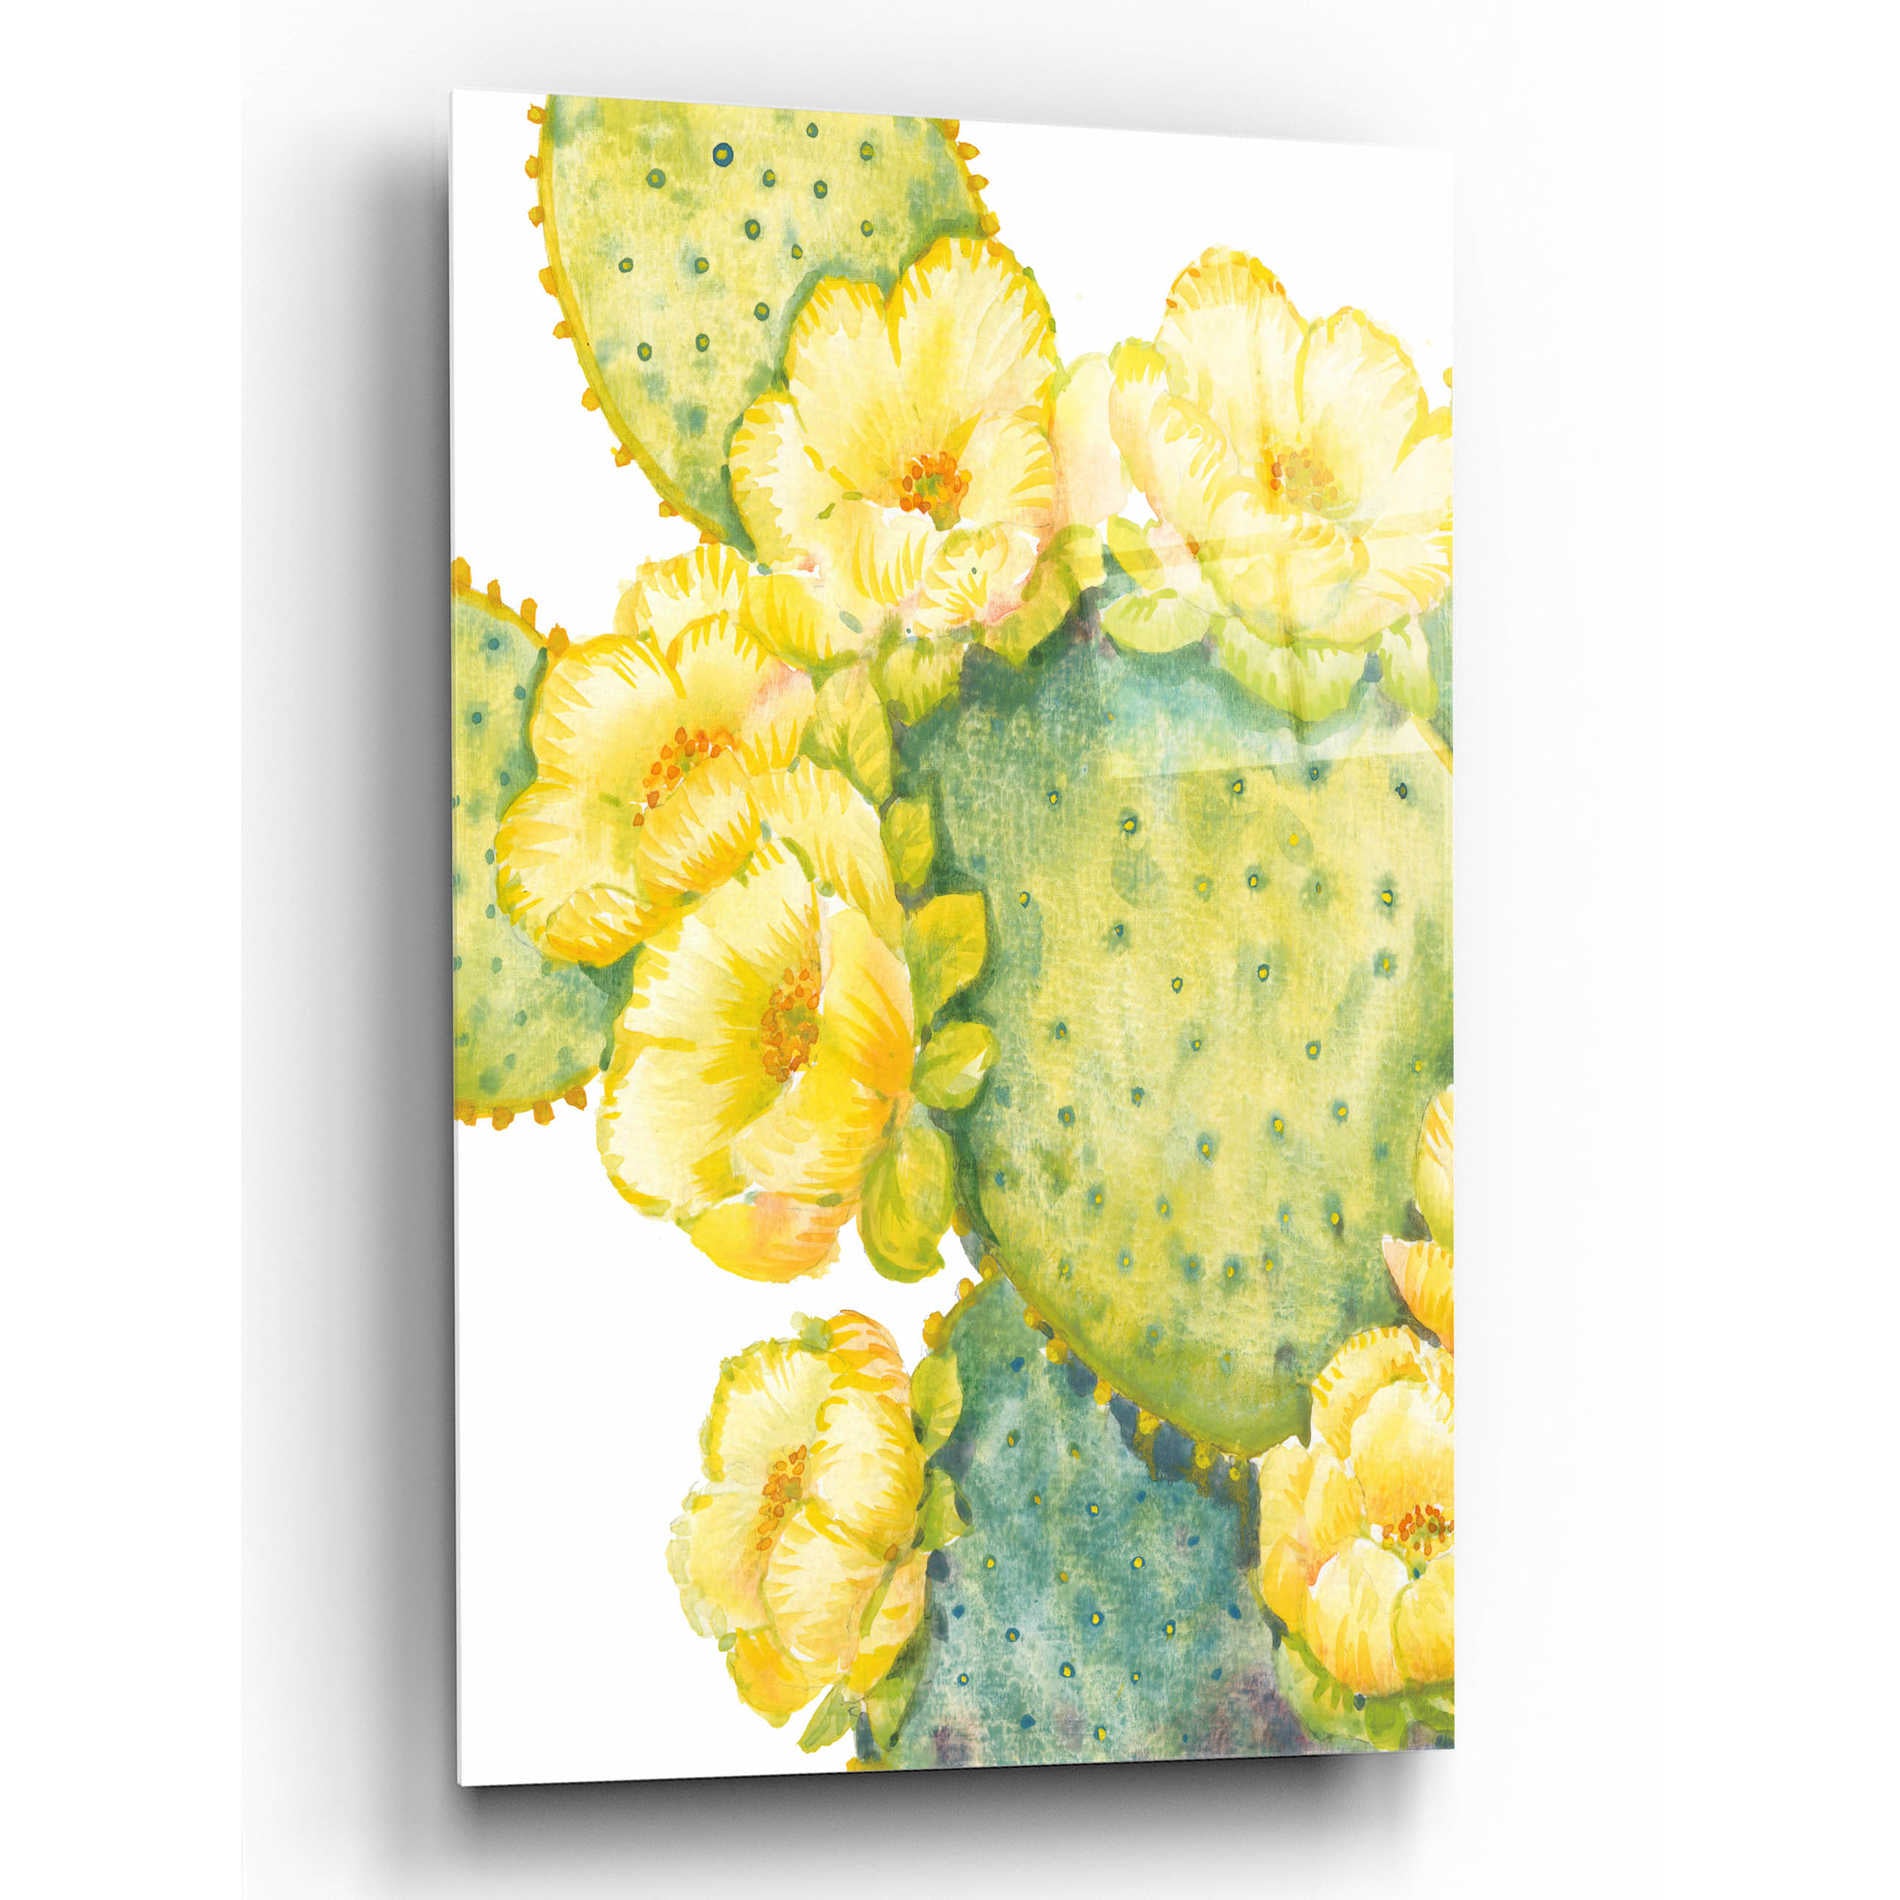 Epic Art 'Cactus on Silver I' by Tim O'Toole, Acrylic Glass Wall Art,12x16